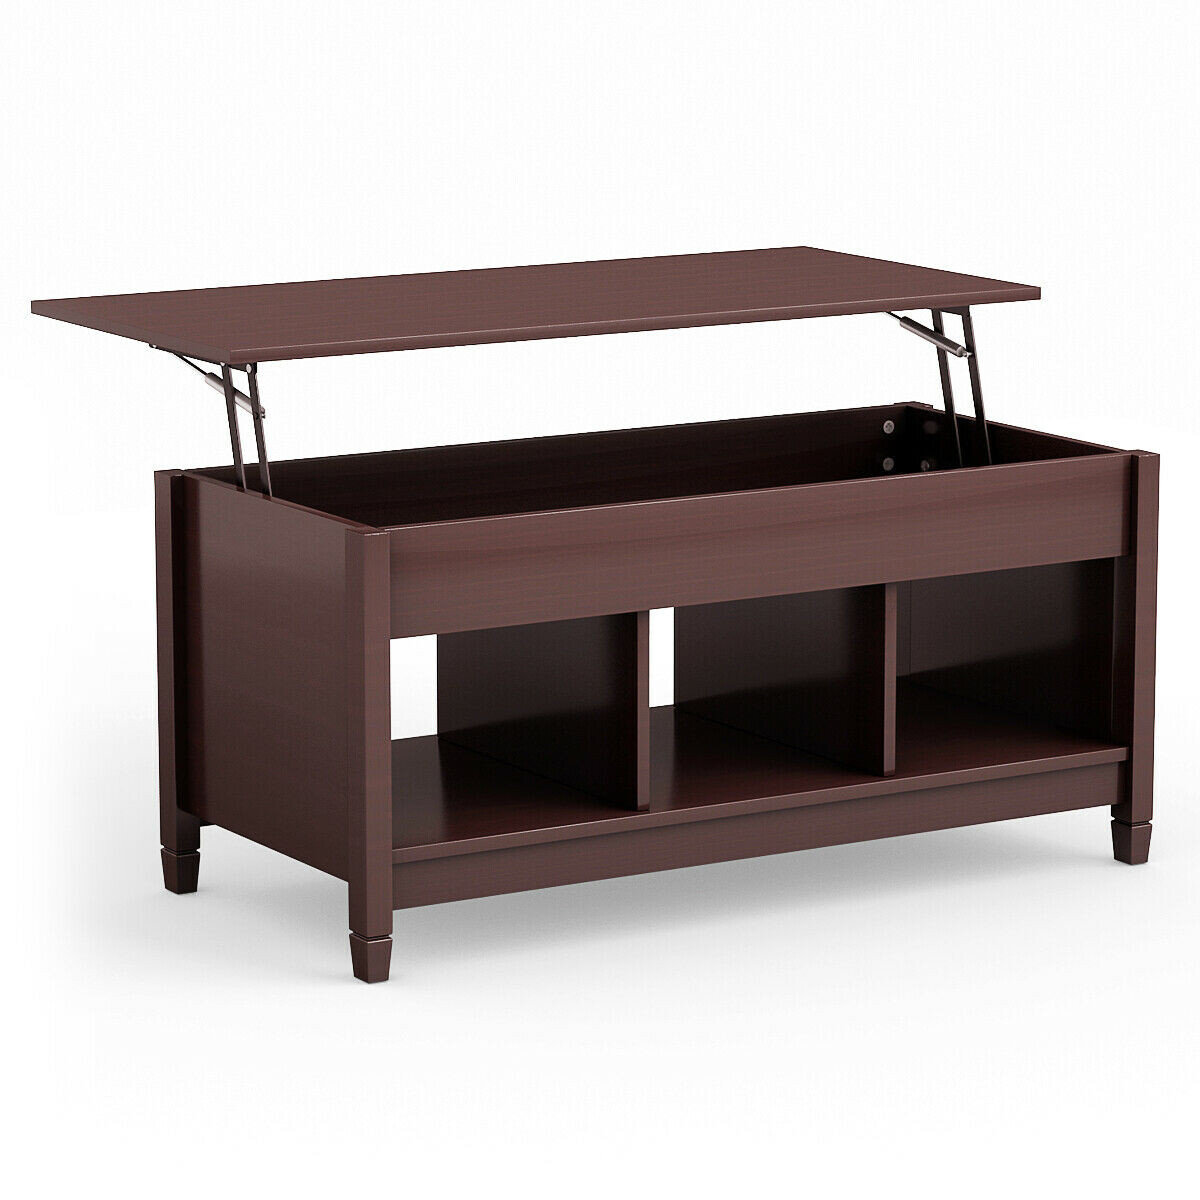 Lift Top Coffee Table with Hidden Storage Compartment-Coffee - Color: Coffee